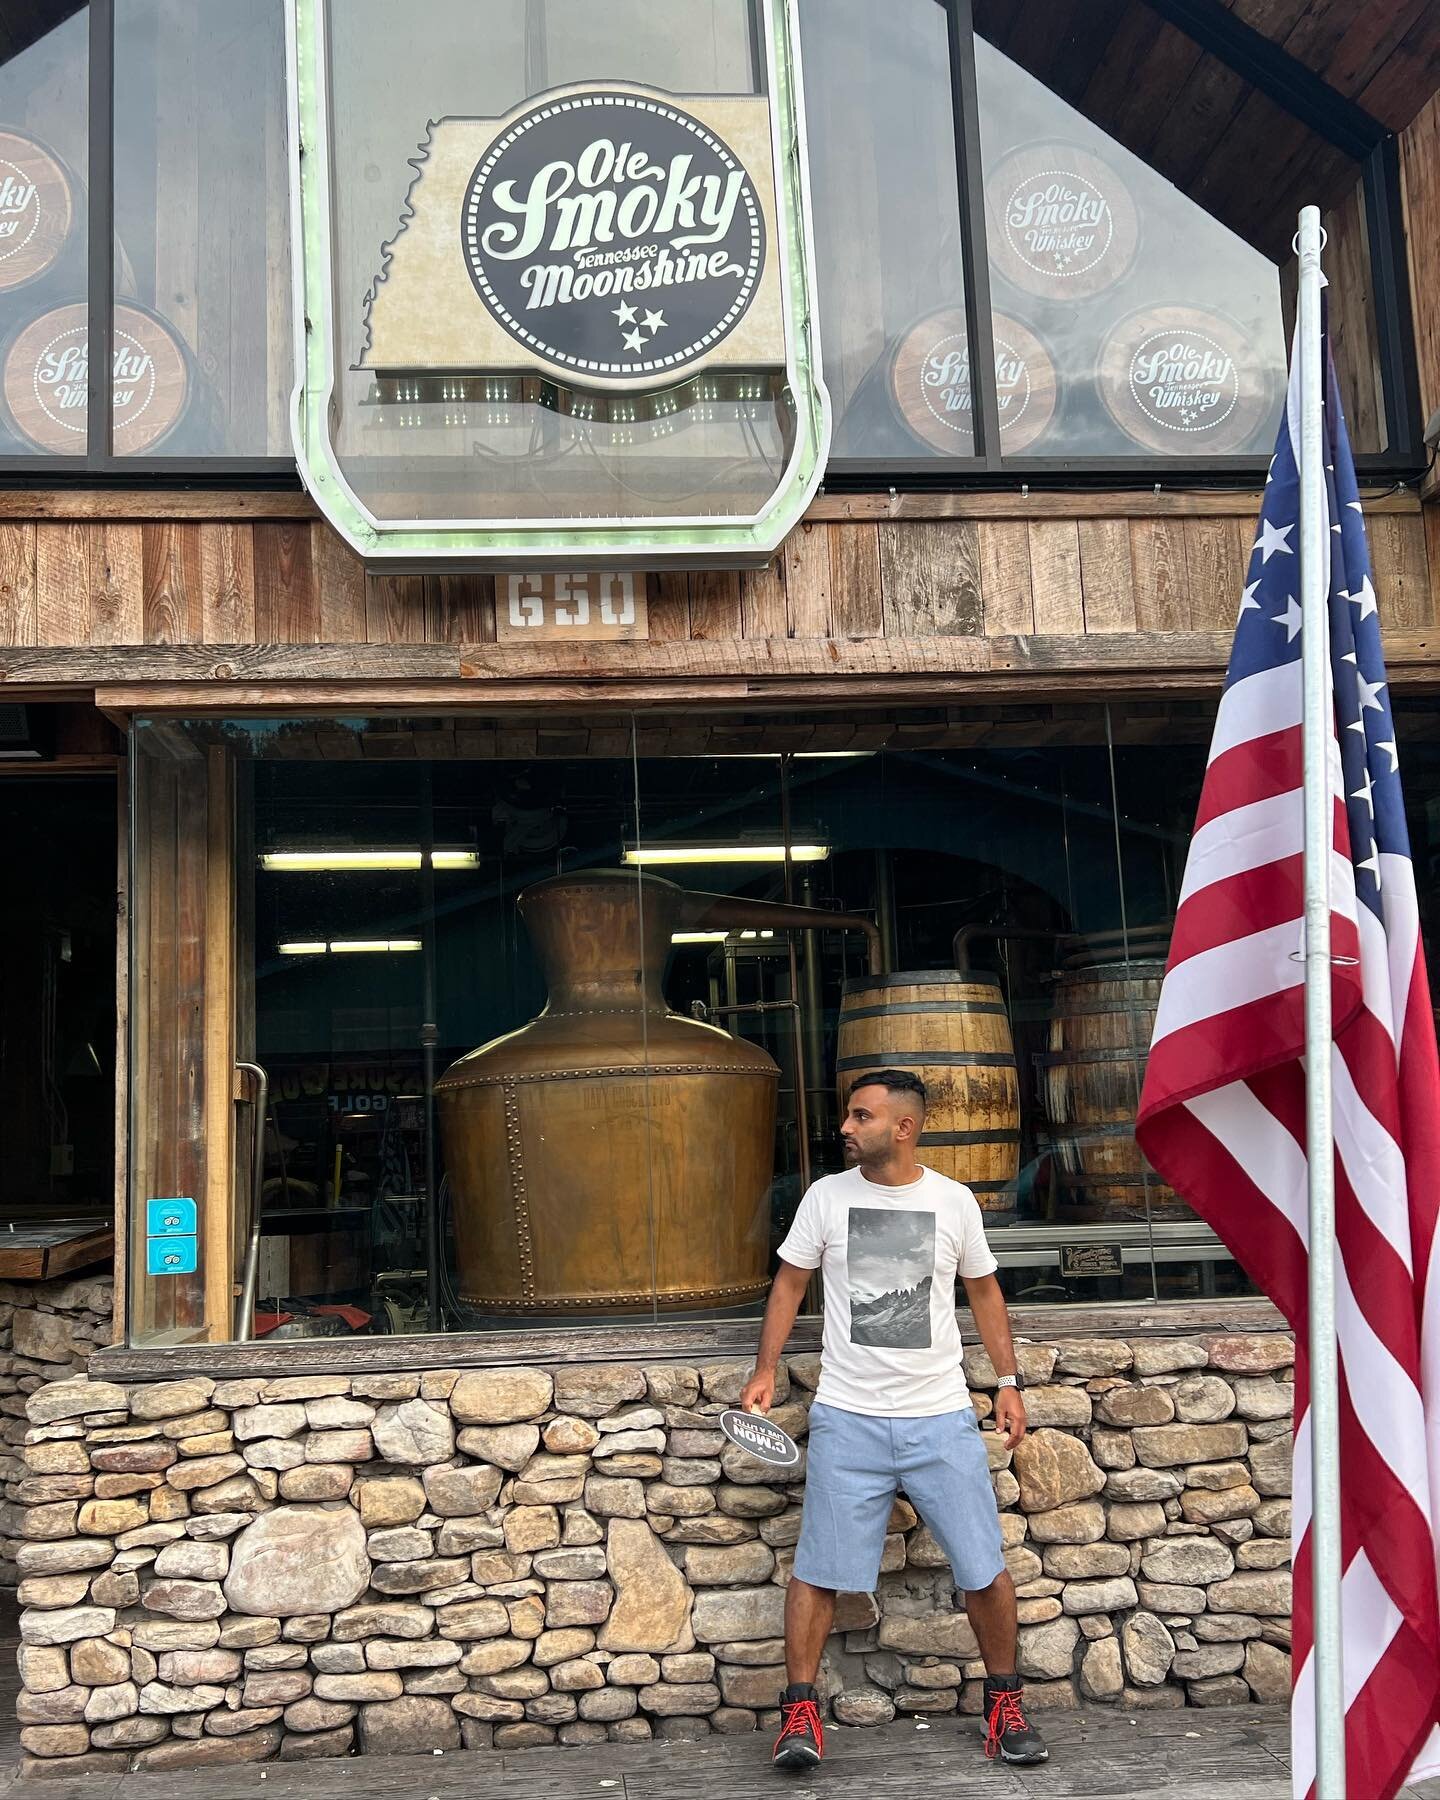 Cowboy boots, country roots and Nashville Nights. 

#musiccity #nashville #tenessee #gaitlinburg #smokymountains #cabininthewoods #countrymusic #countryliving #4thjuly